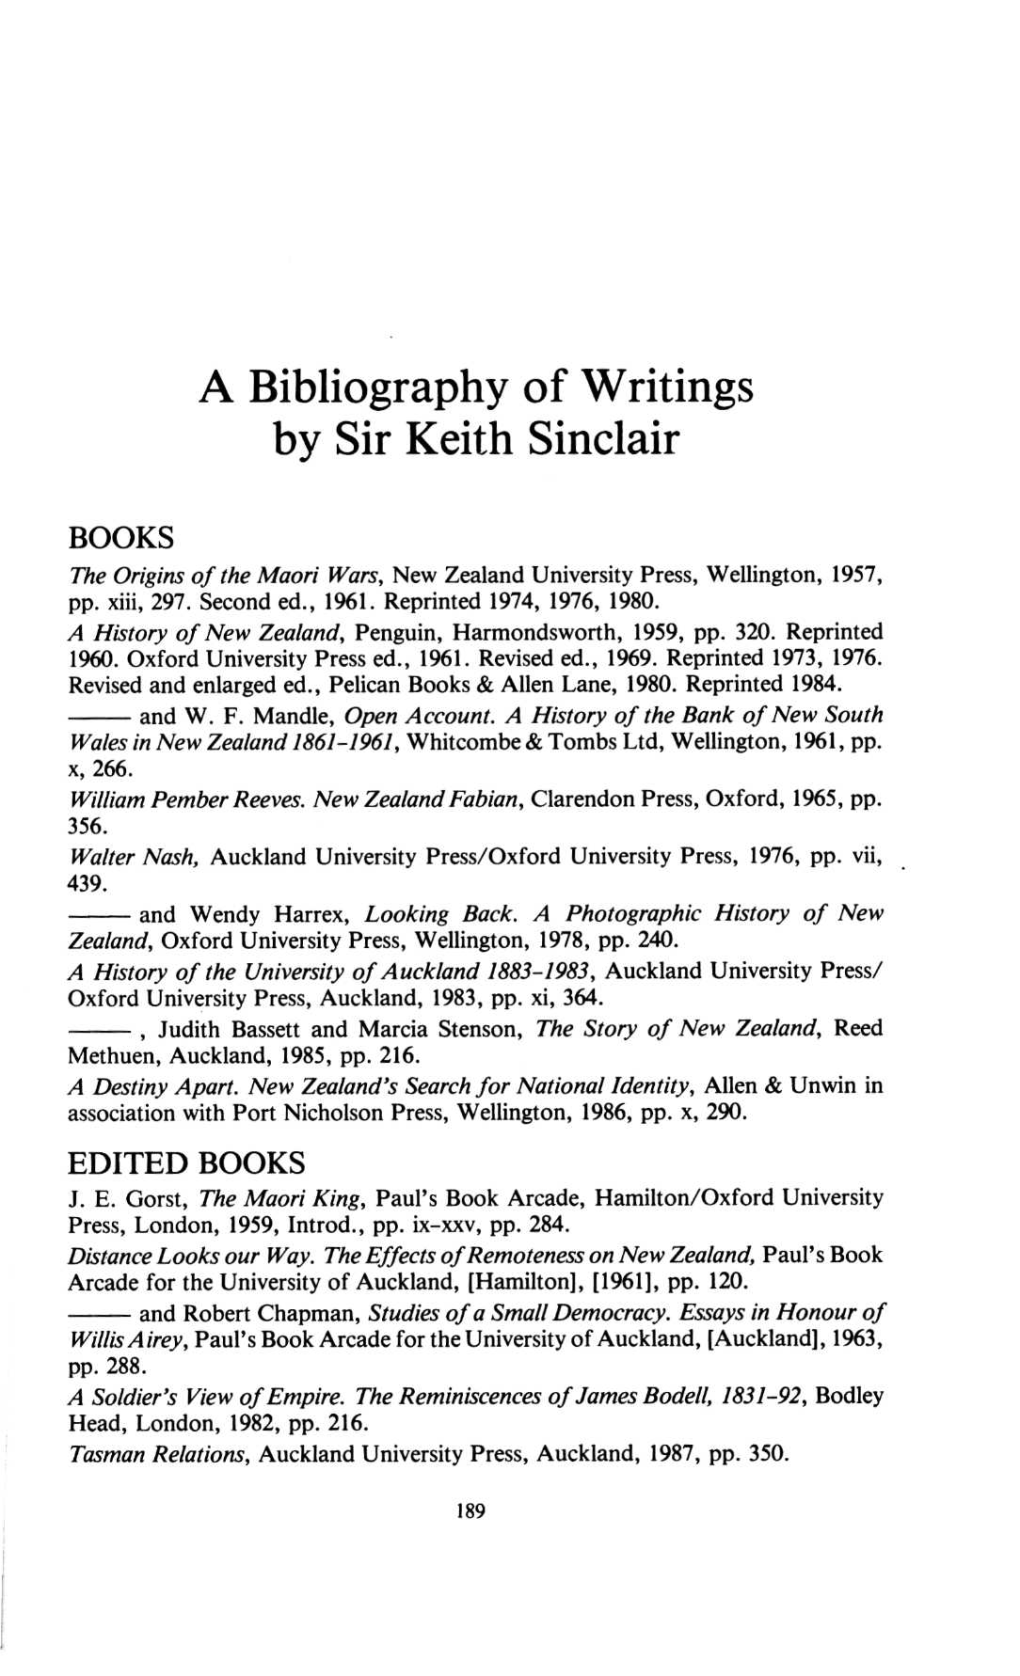 A Bibliography of Writings by Sir Keith Sinclair